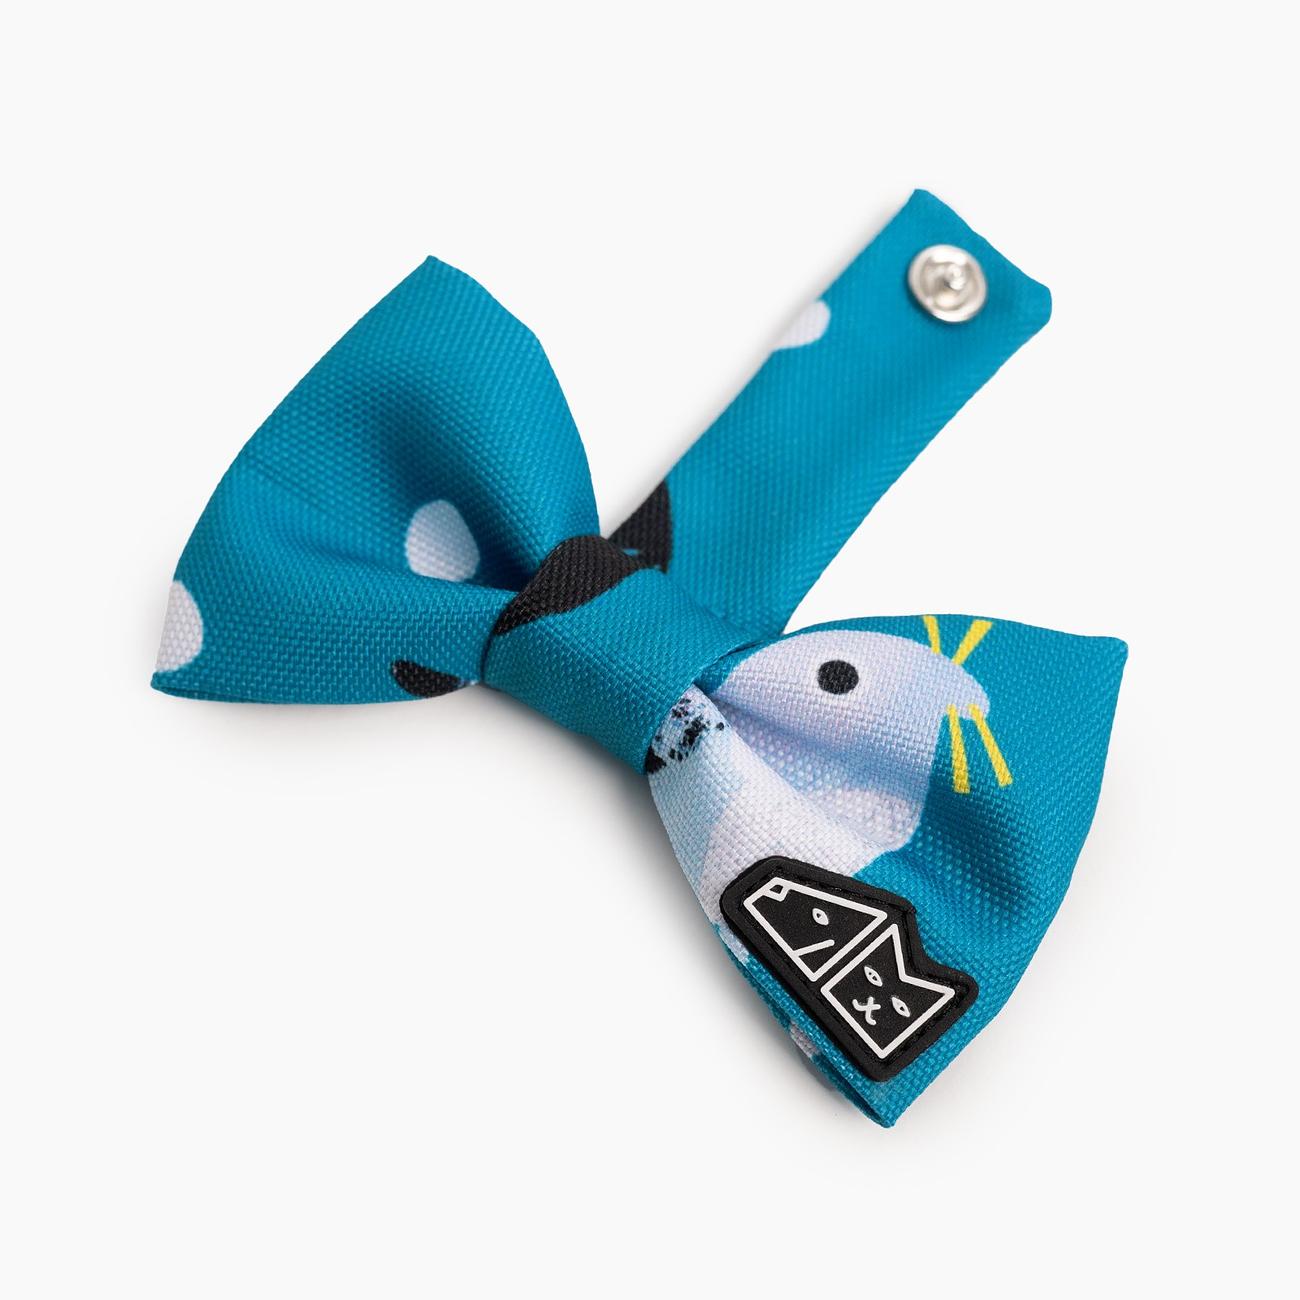 Bow tie "What does the seal said" 